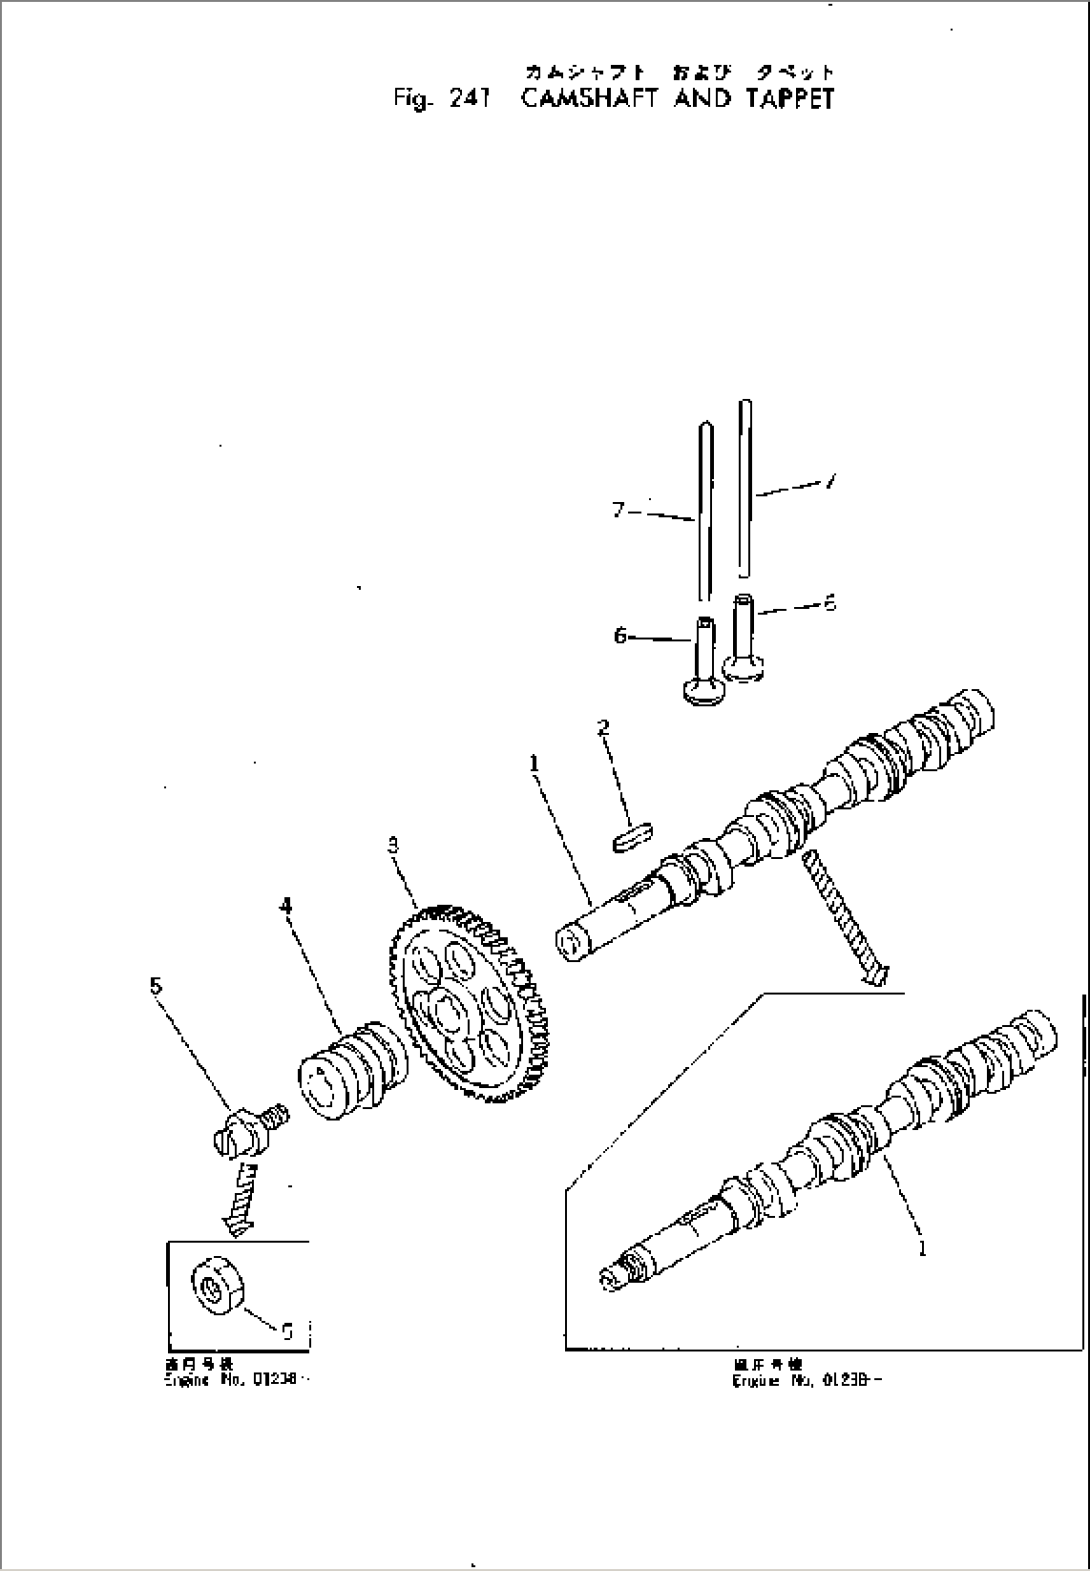 CAMSHAFT AND TAPPET